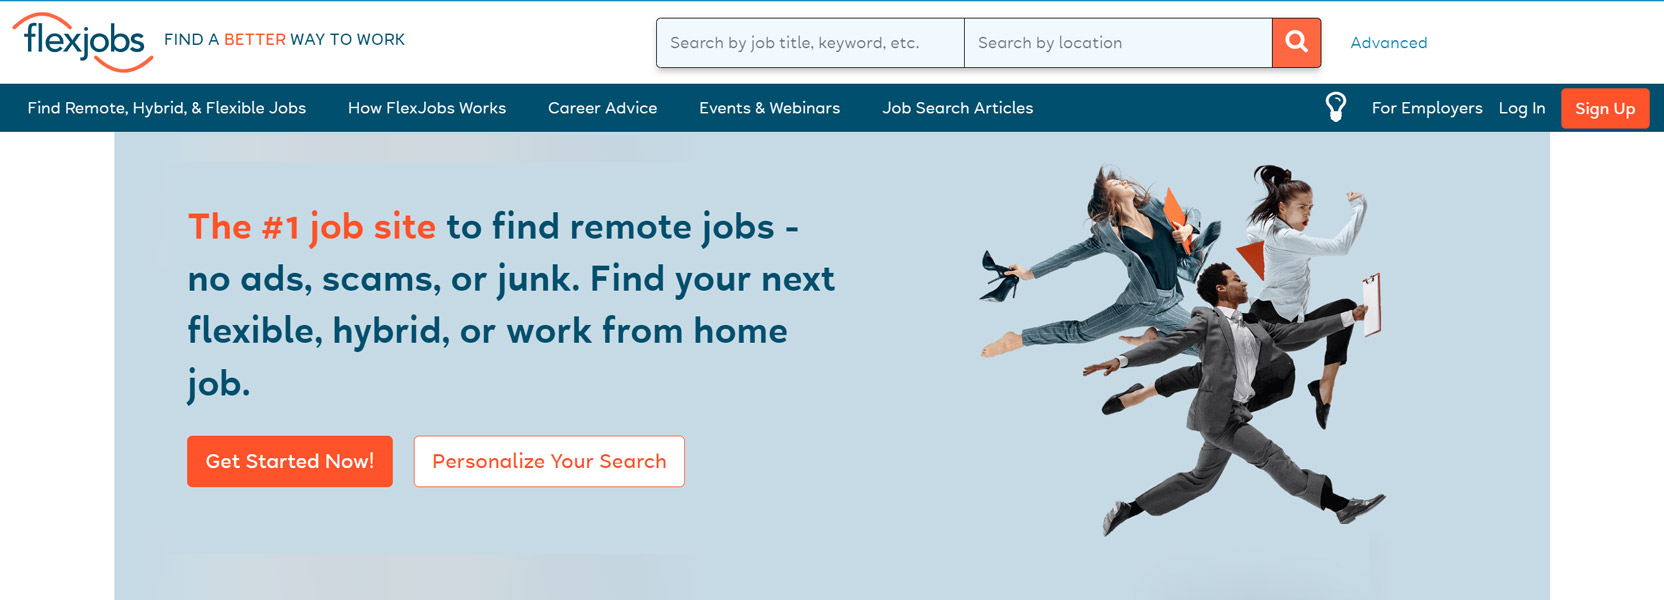 Screenshot of the FlexJobs home page